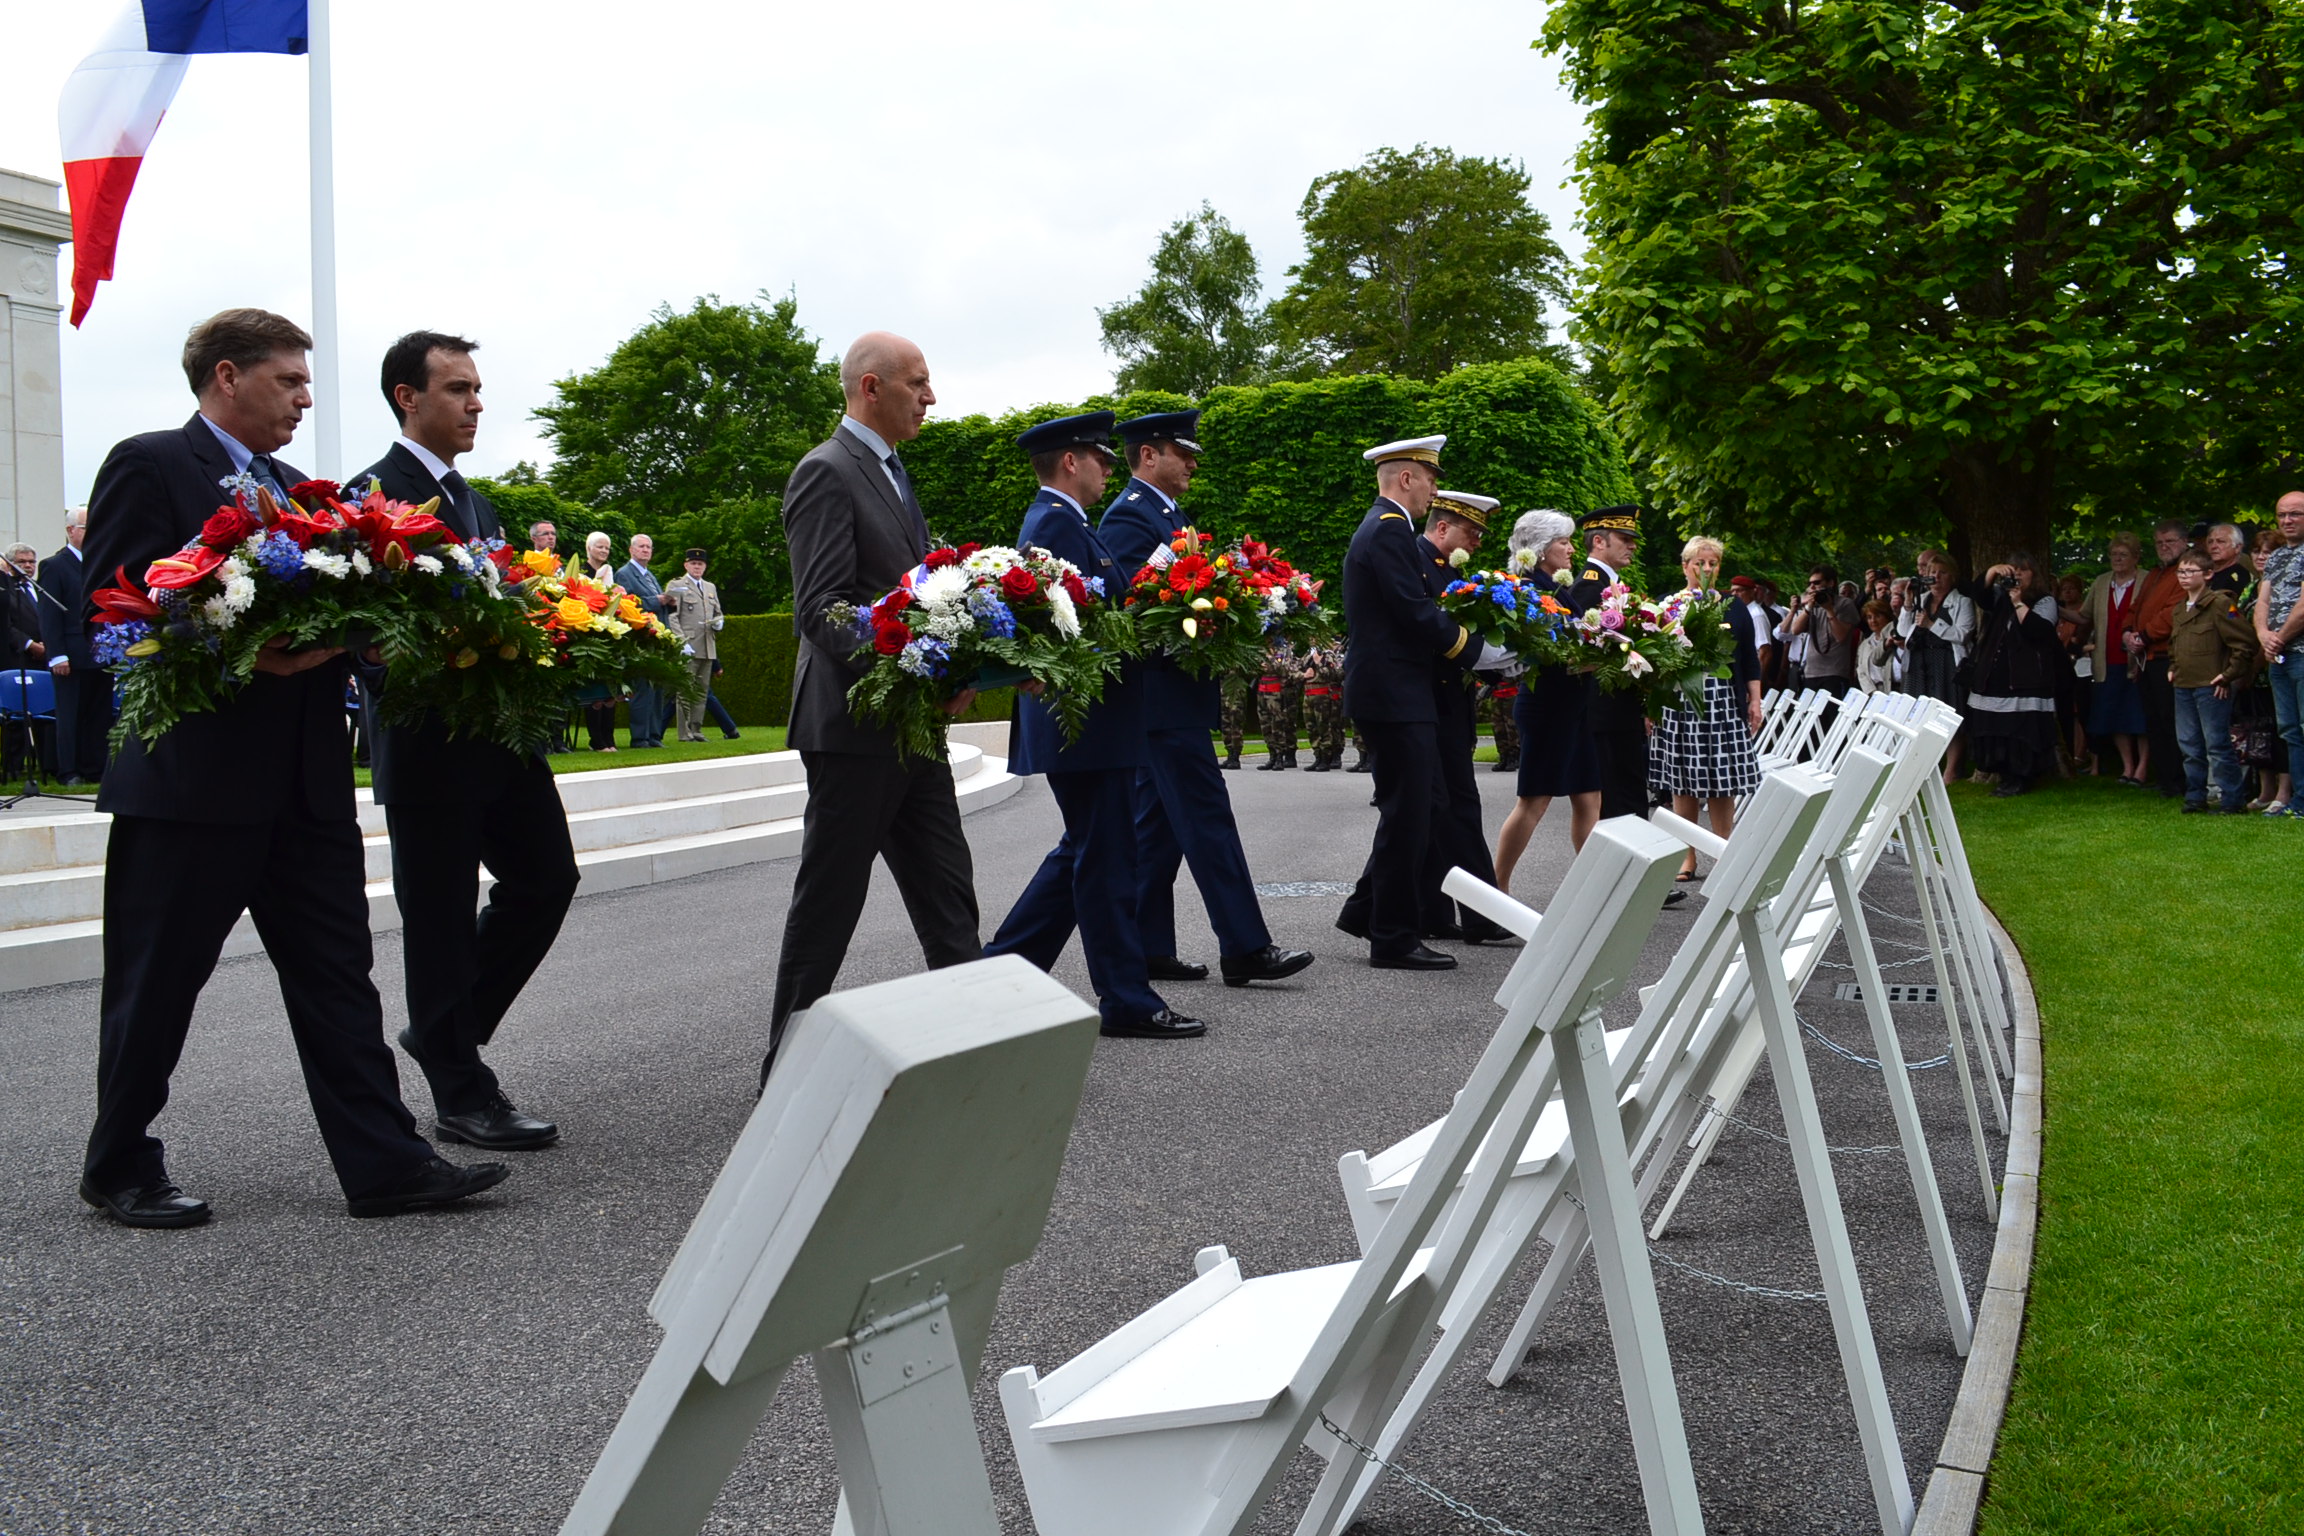 Members of the official party prepare to lay wreaths during the ceremony. 